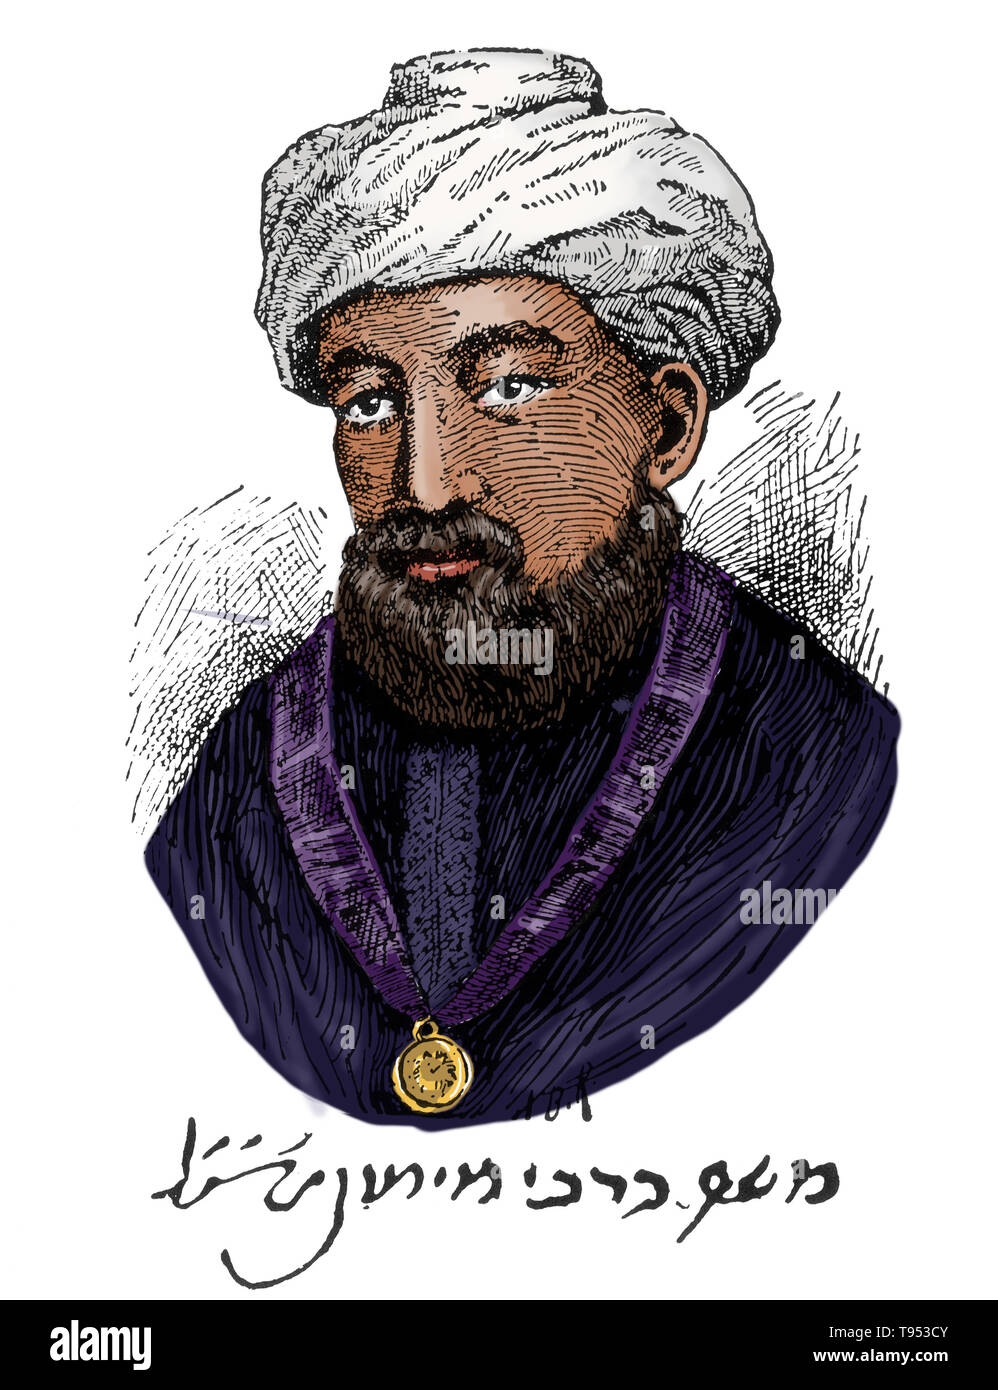 Caption: 'Engraved portrait of Maimonides, as he was thought to look, with his autograph in facsimile.' Mosheh ben Maimon (1135 - December 12, 1204) was a preeminent medieval Spanish, Sephardic Jewish philosopher, astronomer and one of the most prolific and influential Torah scholars and physicians of the Middle Ages. He is acknowledged to be one of the foremost rabbinical arbiters and philosophers in Jewish history, his copious work comprising a cornerstone of Jewish scholarship. Stock Photo